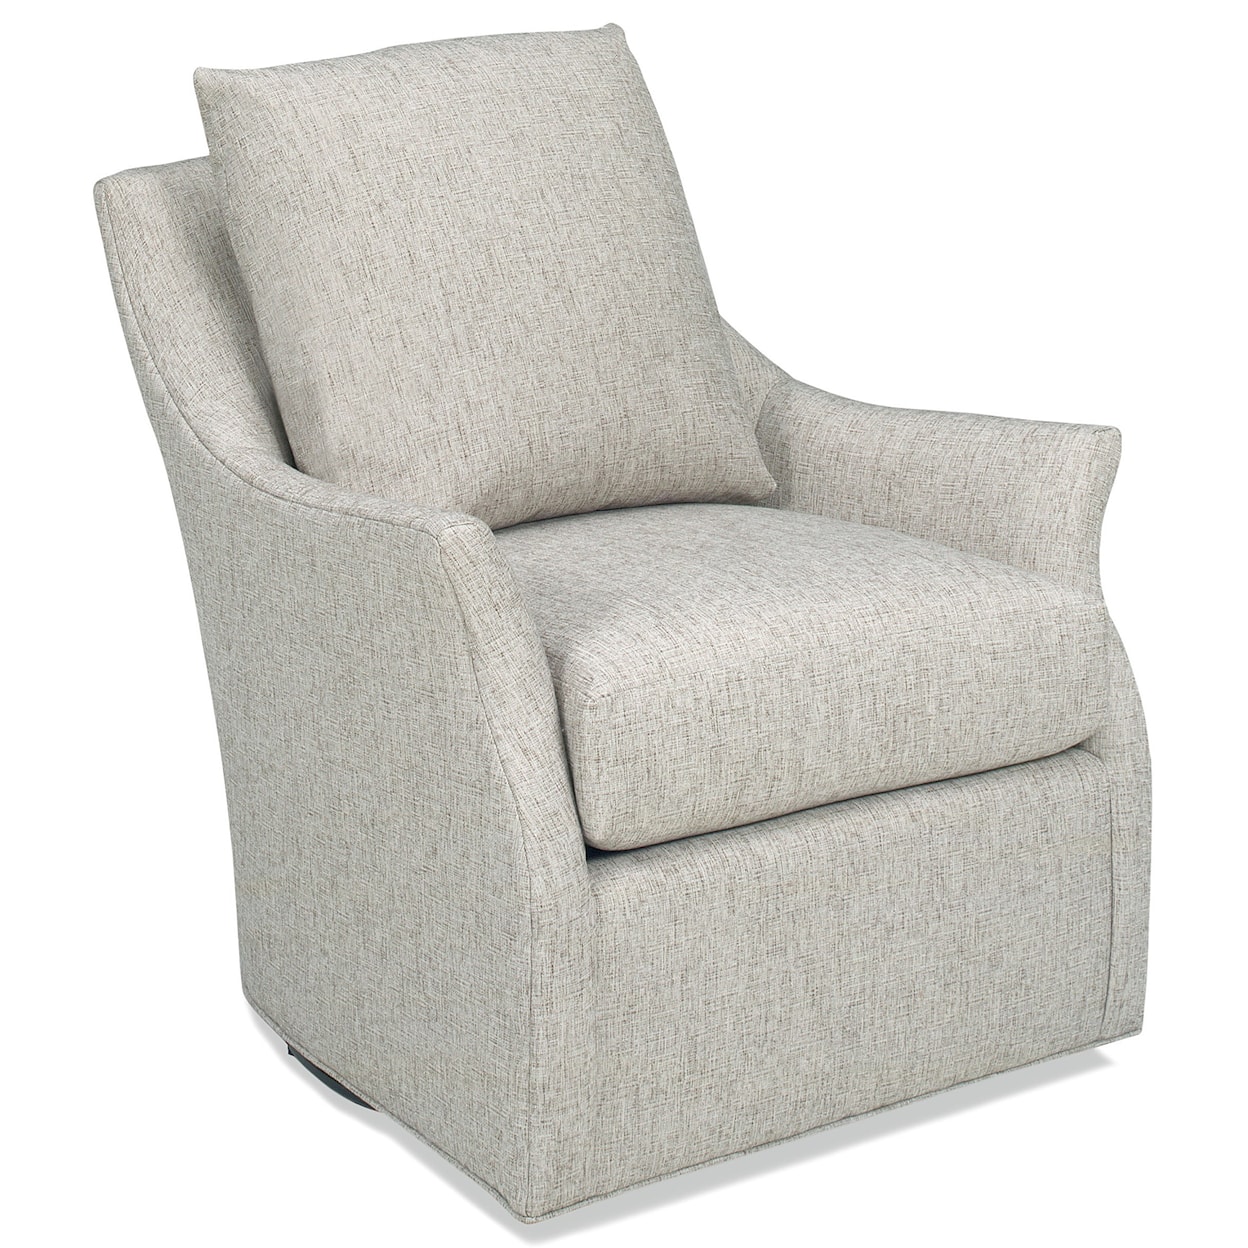 Temple Furniture Lucy Swivel Chair